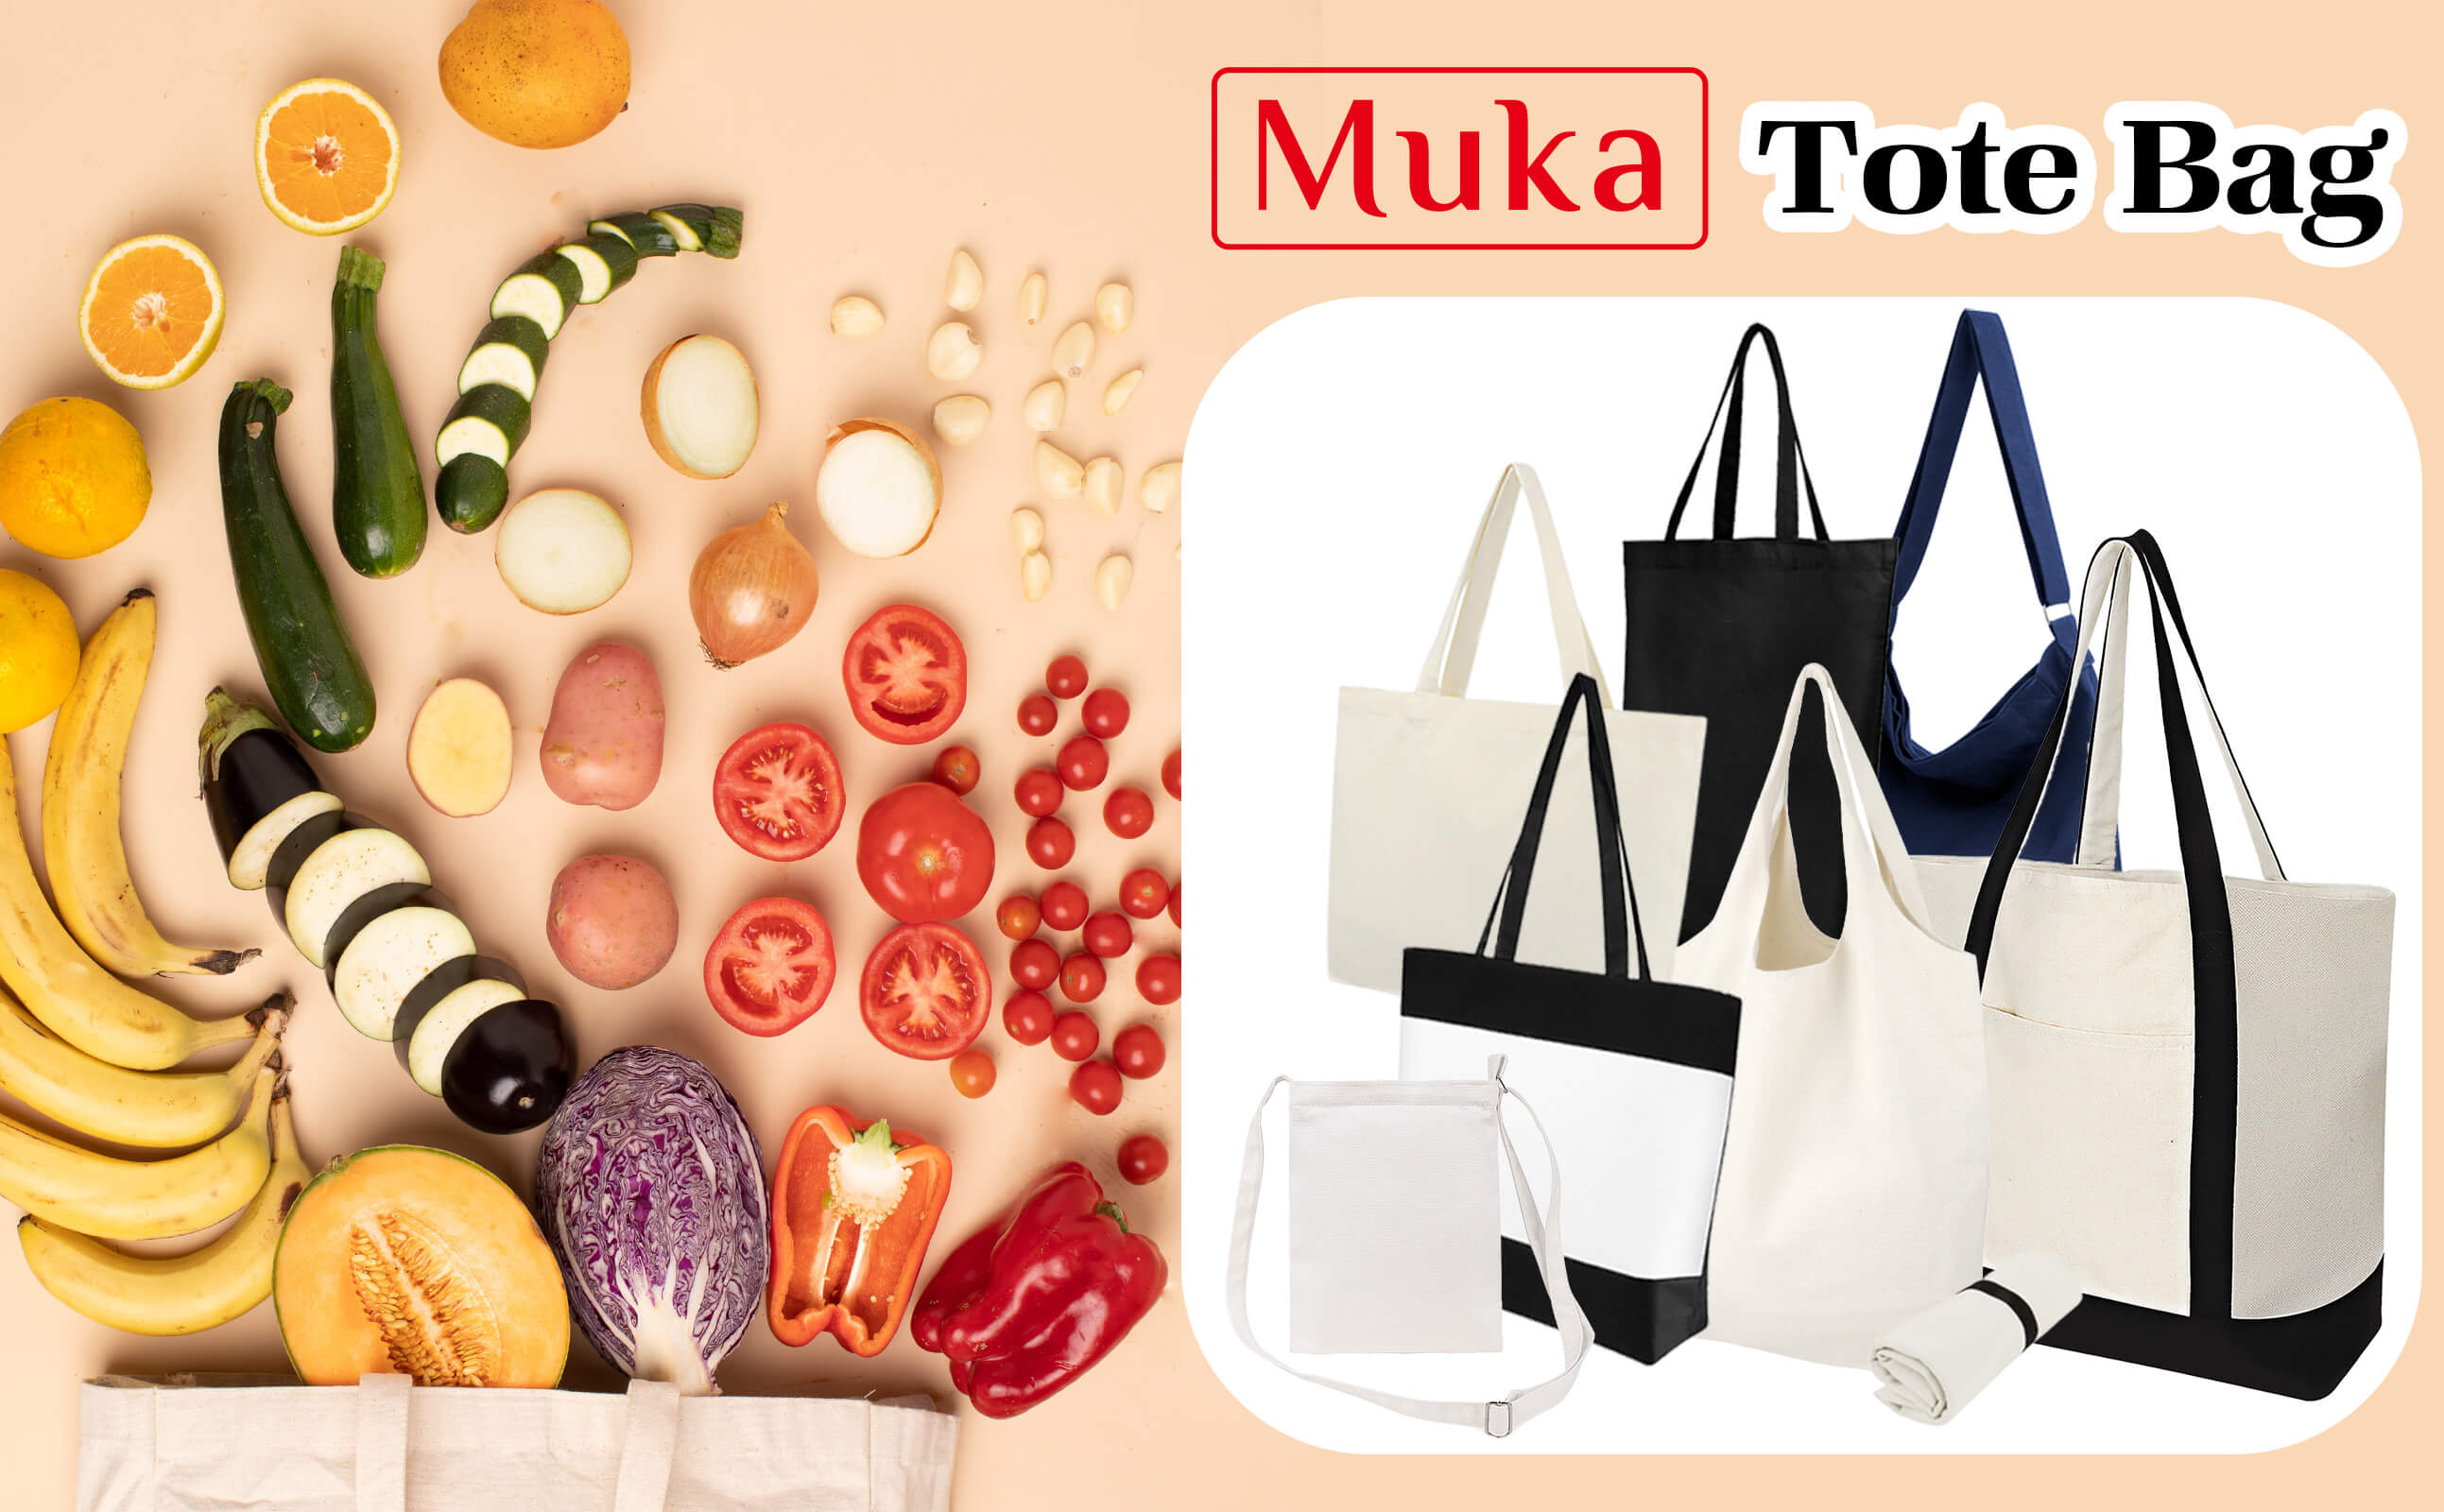 Muka Personalized Canvas Gusseted Tote with Lining & Zipper, 15-1/2" x 12" x 3" Present Bag for Mom, Teachers, Bridesmaids